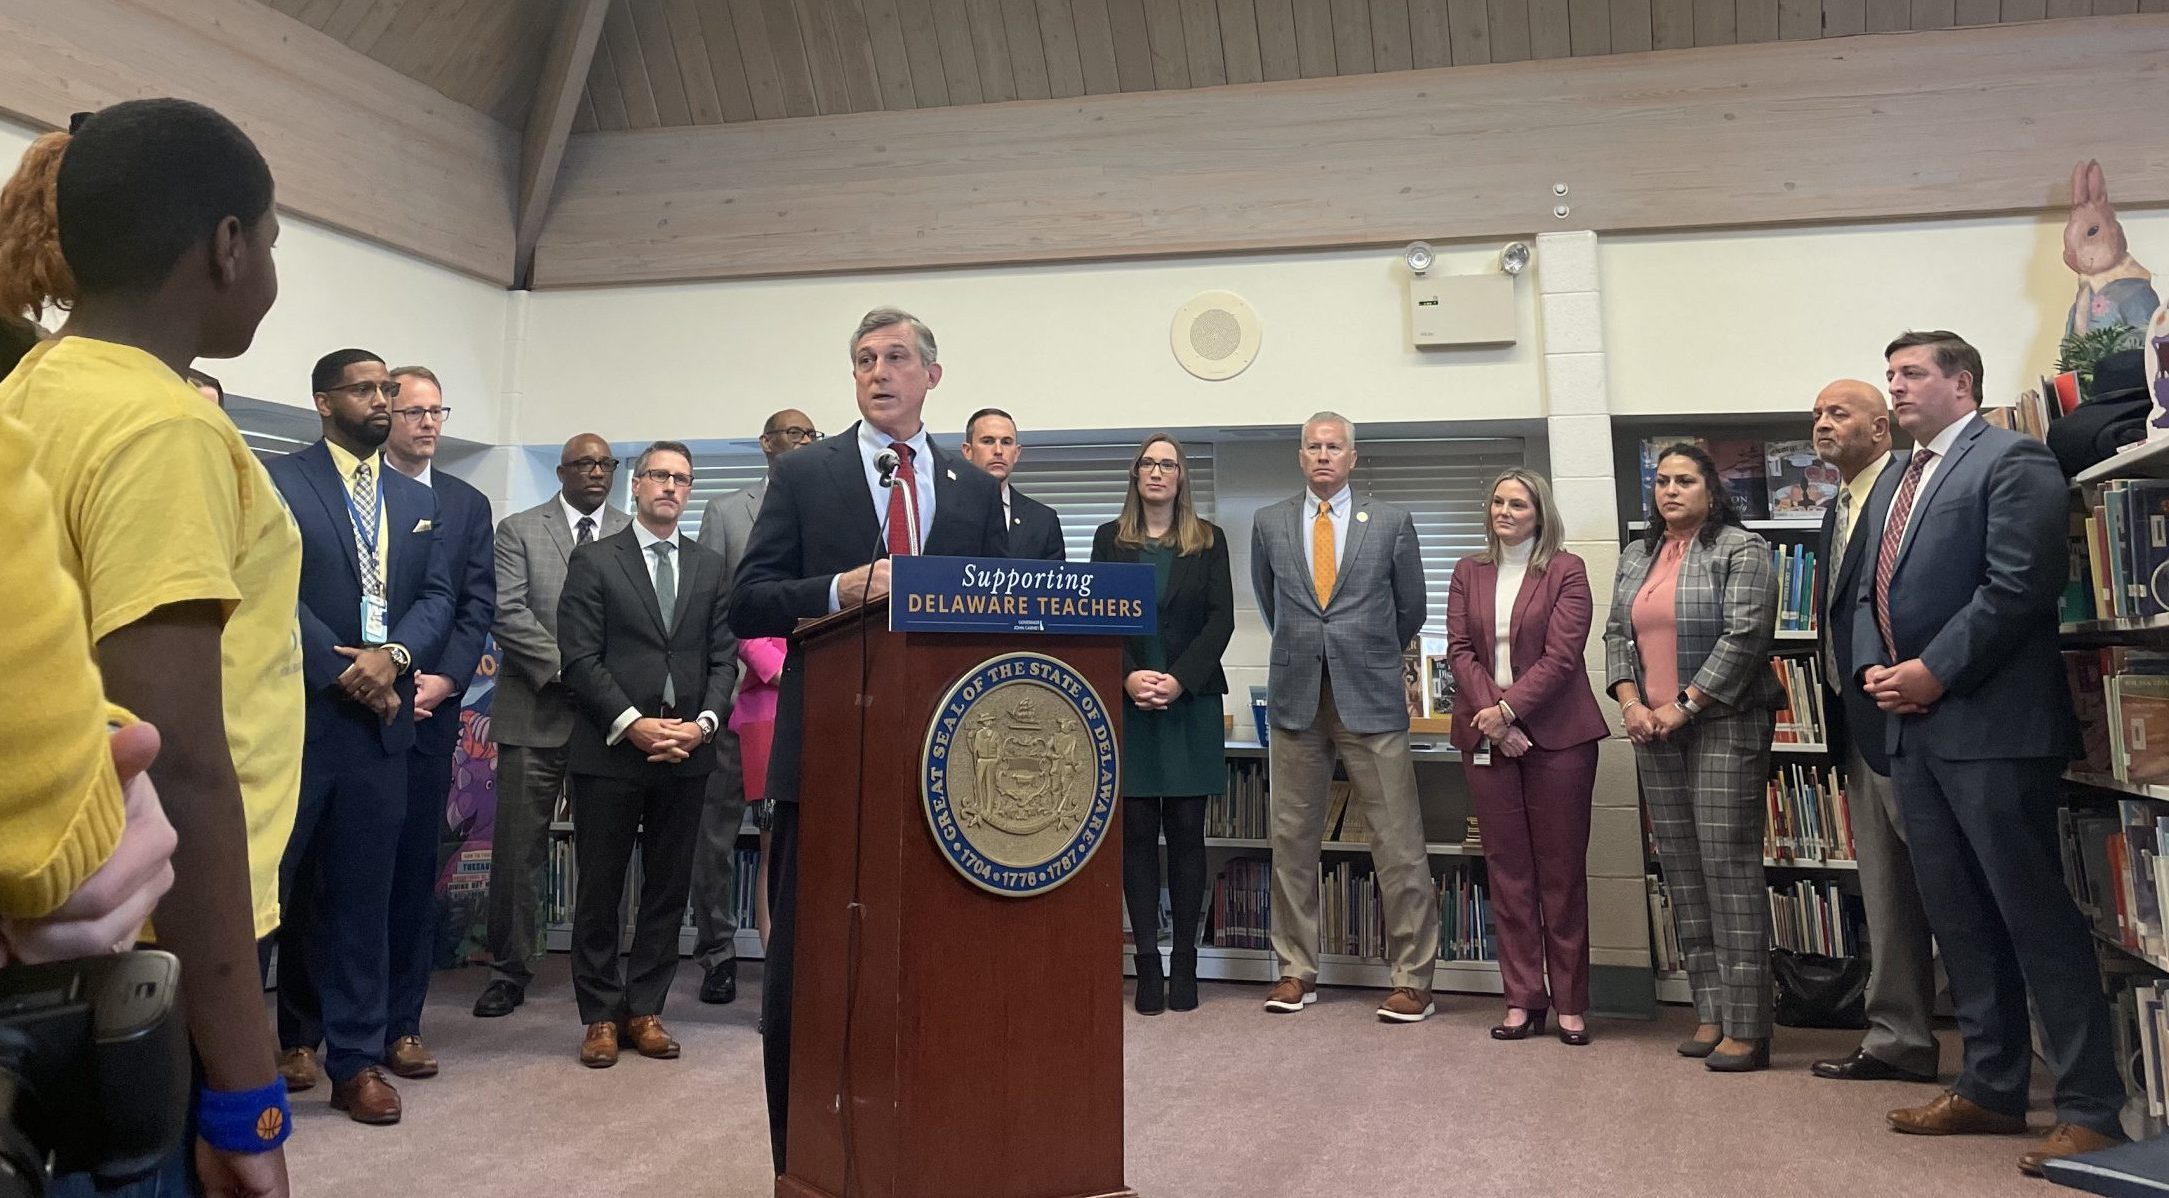 Governor Carney stands behind a podium in front of school administrators, advocates, and members of the General Assembly